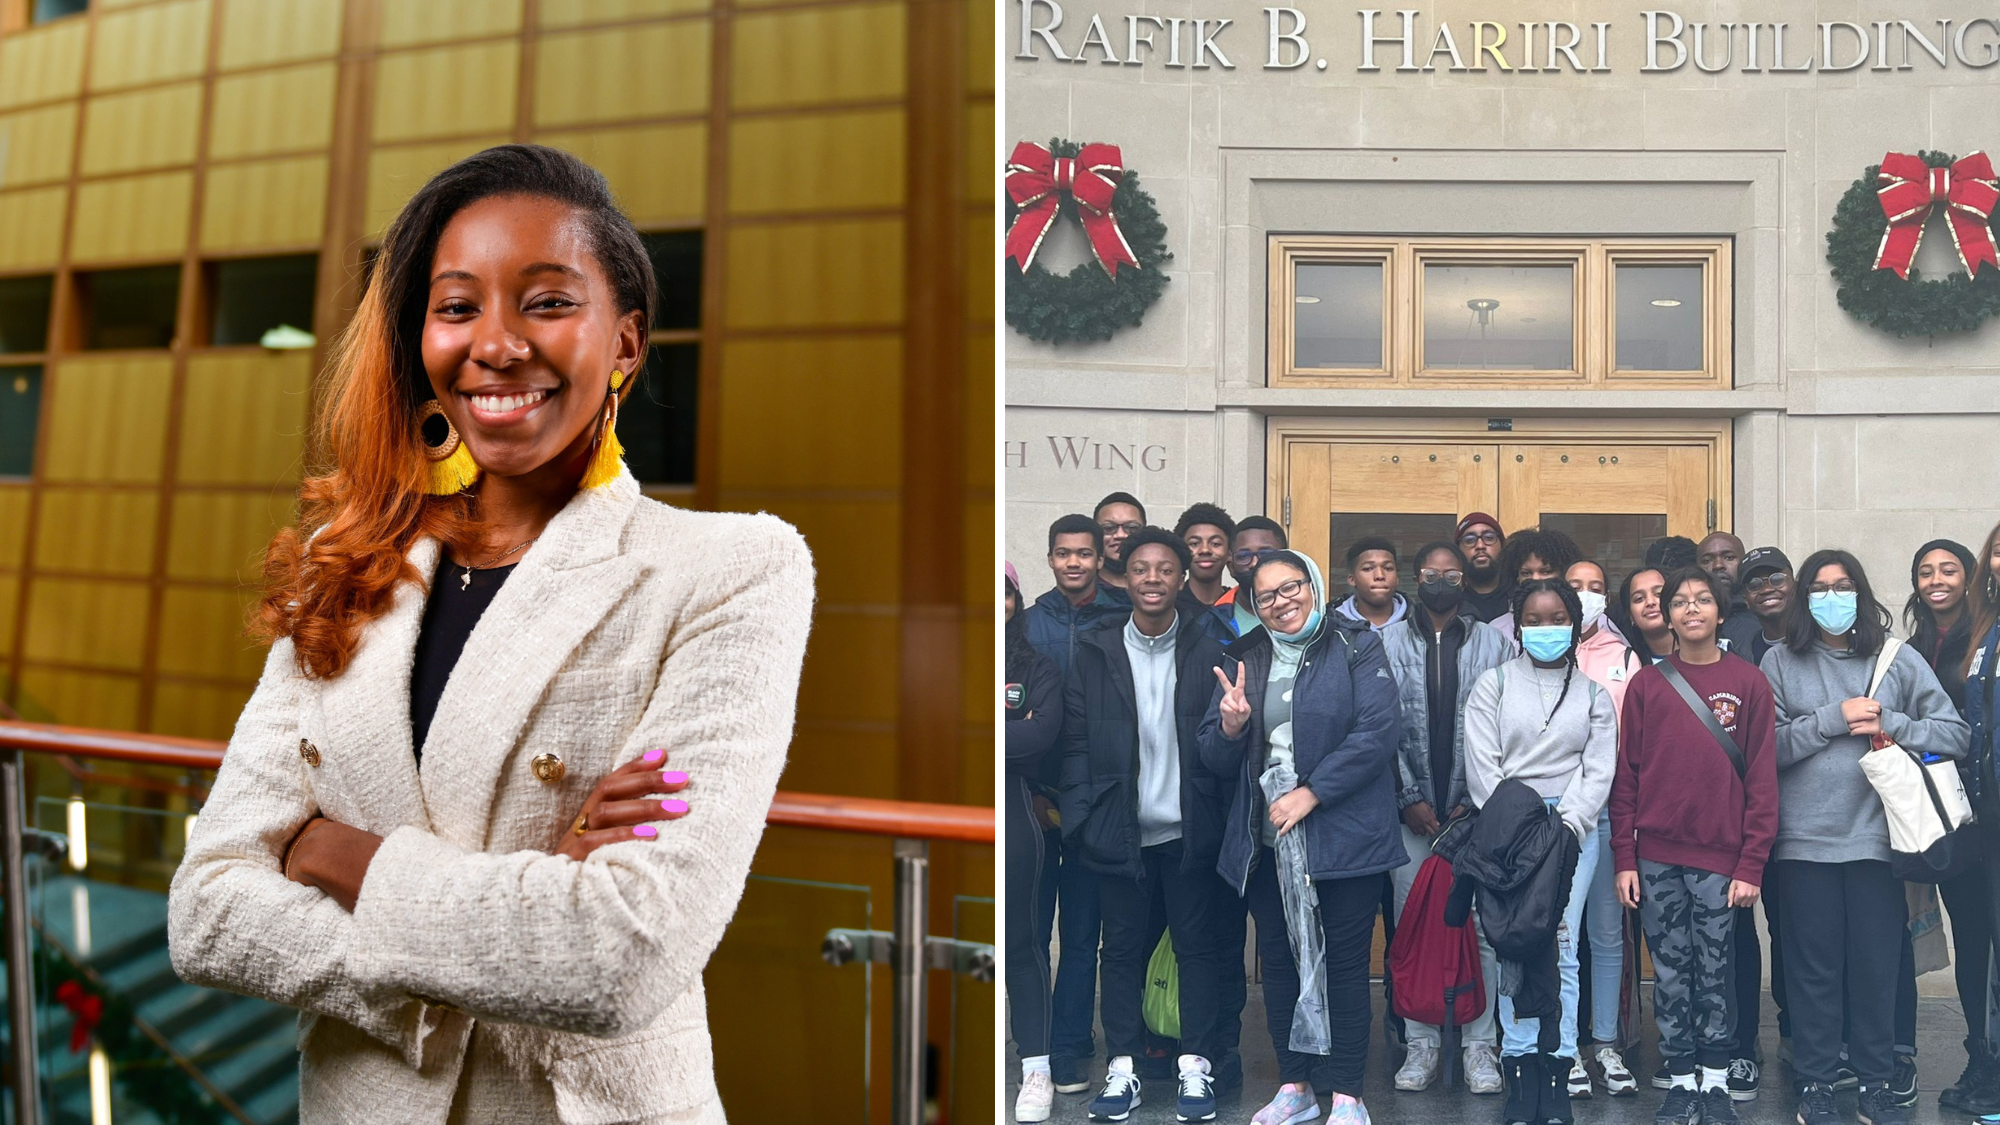 Kilandra Bass (MBA'24) on Cultivating an Inclusive Community and Increasing Representation of Black Students at Georgetown